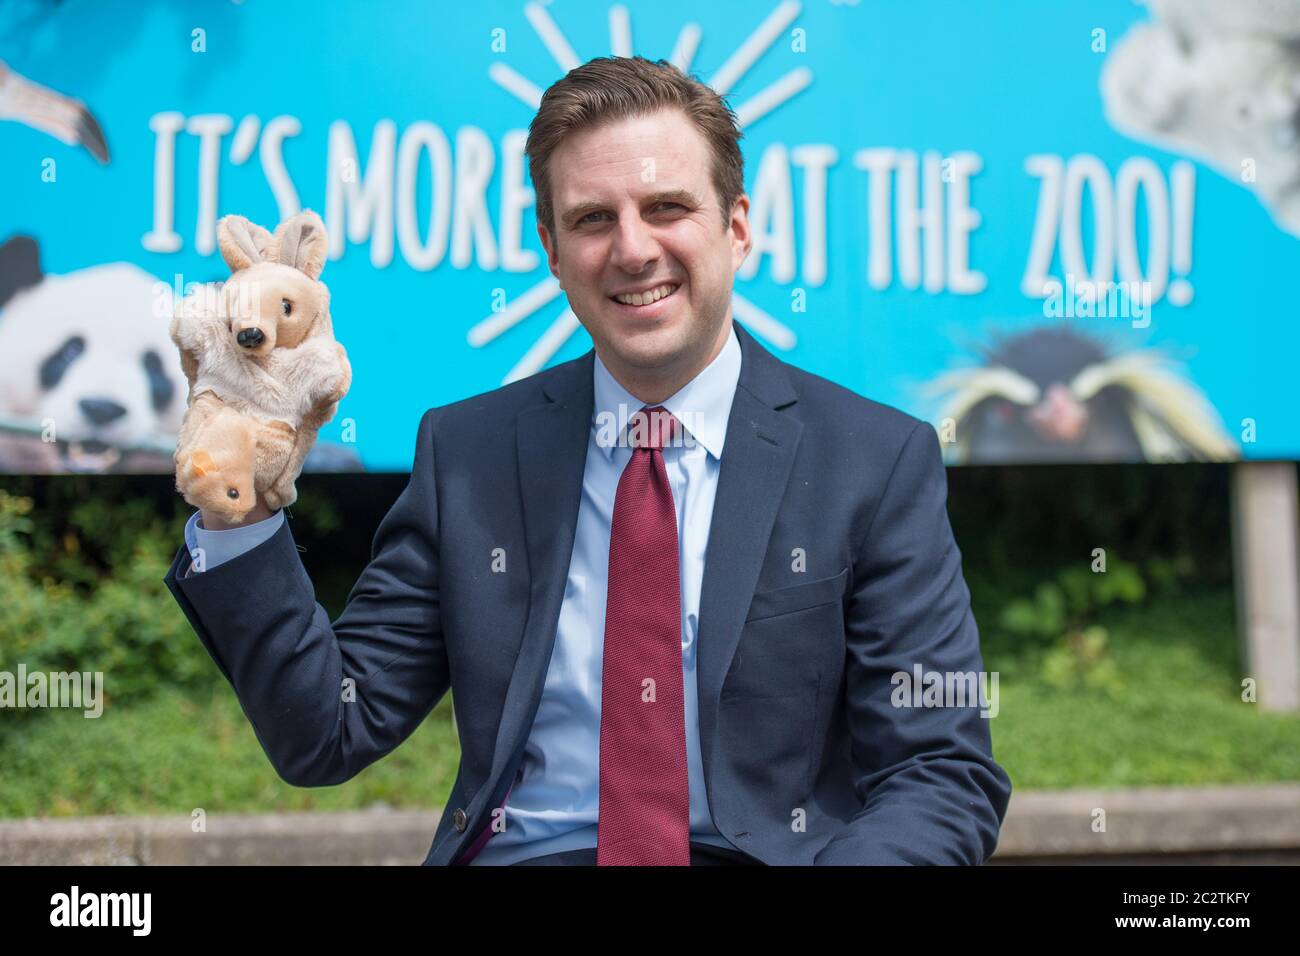 Edinburgh, Scotland, UK. , . Pictured: Daniel Johnson MSP of the Scottish Labour Party seen campaigning on the steps of the zoo with posters and animal puppets for the safe re-opening of Edinburgh Zoo as part of phase 2 easing of lockdown restrictions. Credit: Colin Fisher/Alamy Live News Stock Photo